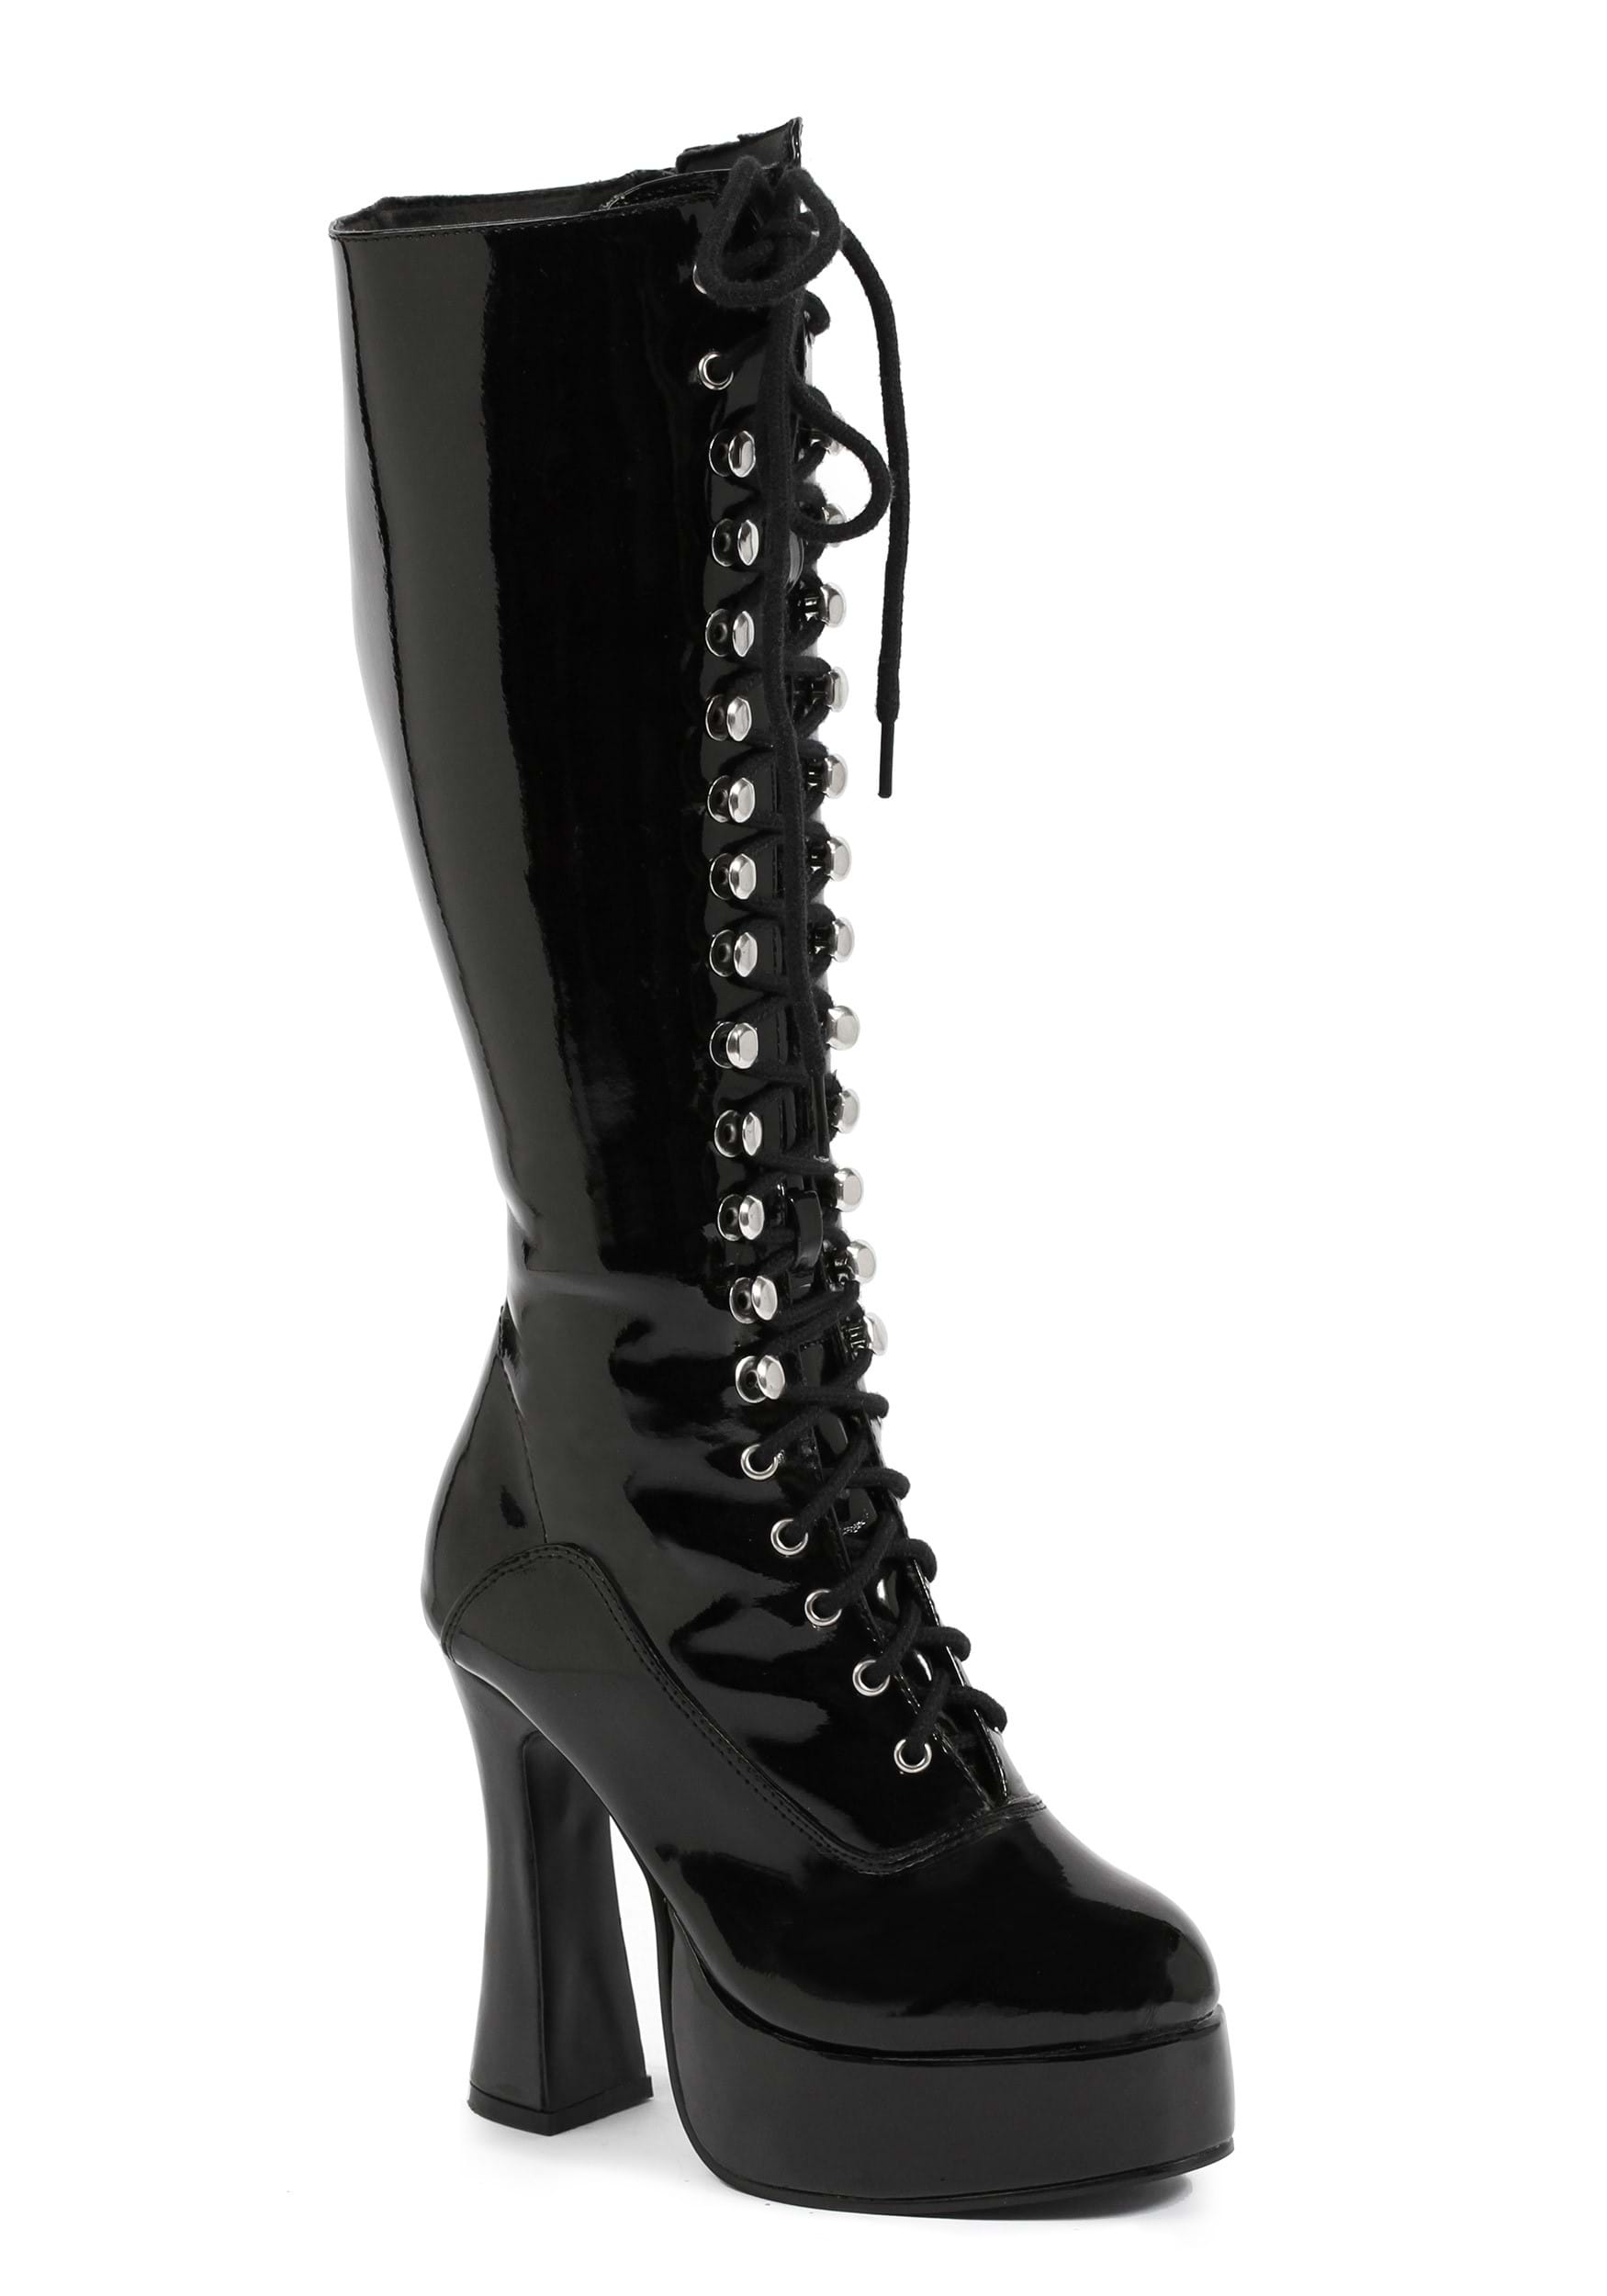 Image of Black Lace Knee High Women's Boots ID EEEASY-5